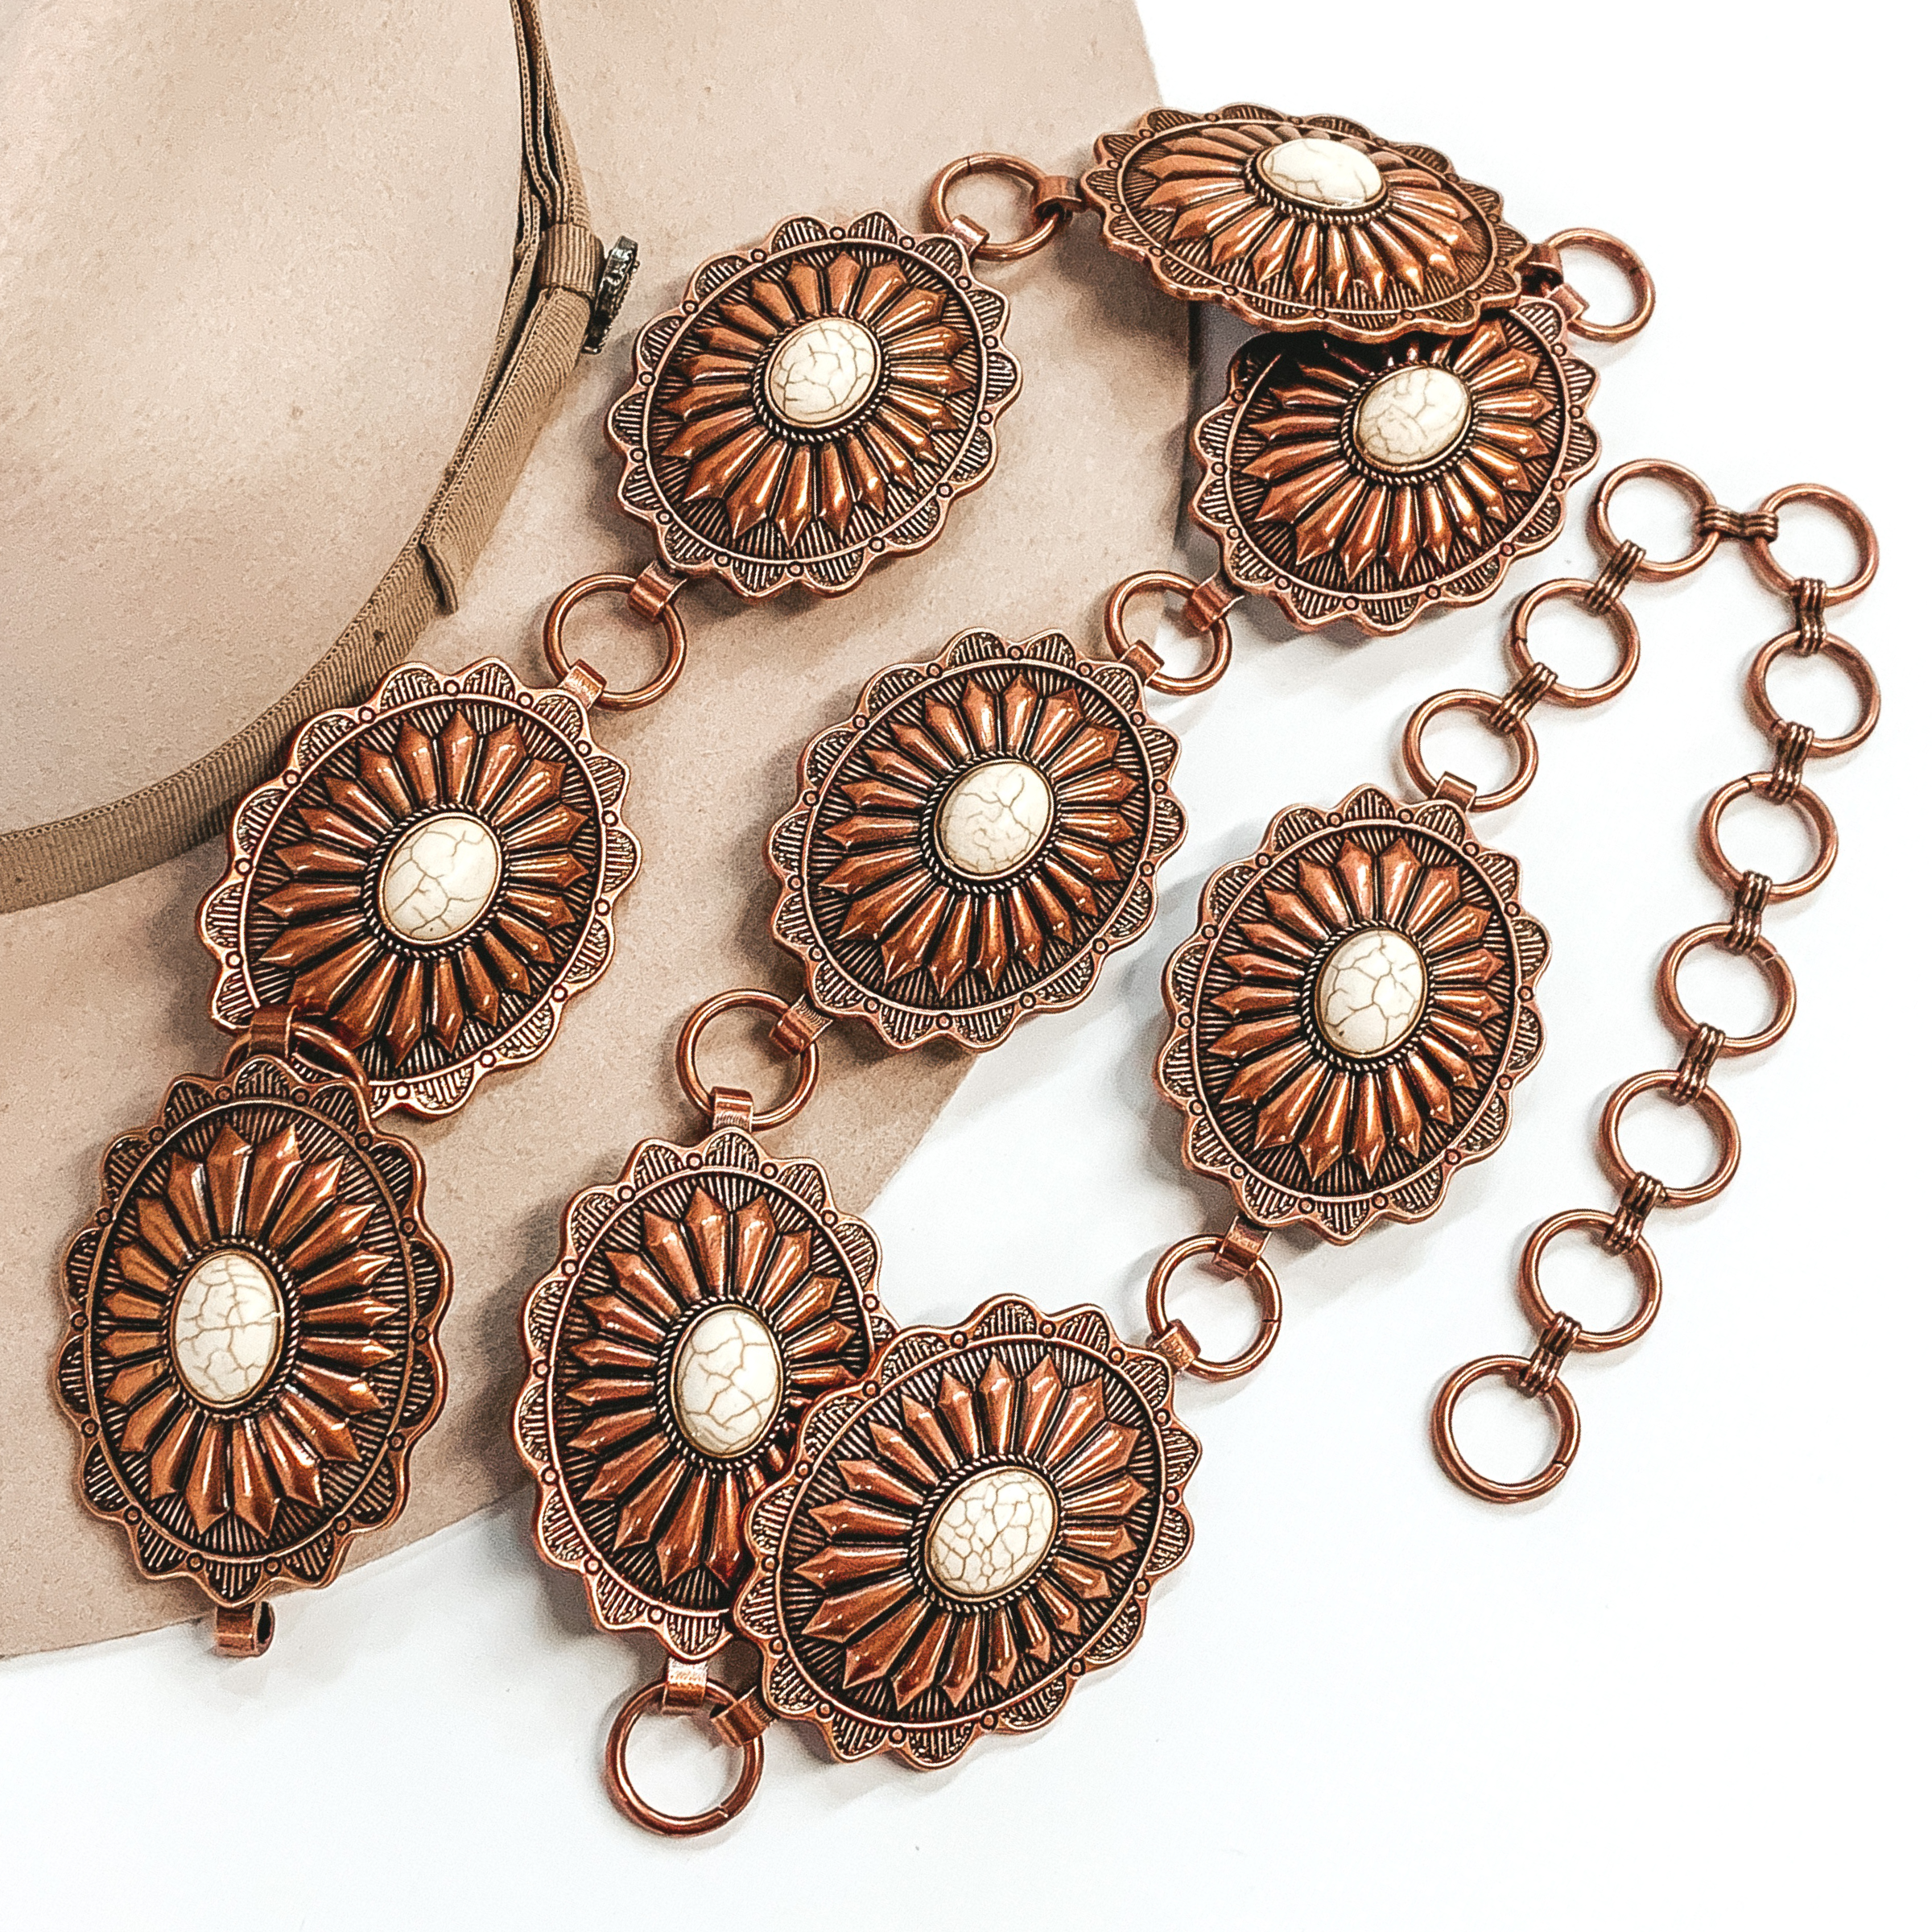 Concho Belt with Center Faux Ivory Stones in Copper Tone - Giddy Up Glamour Boutique